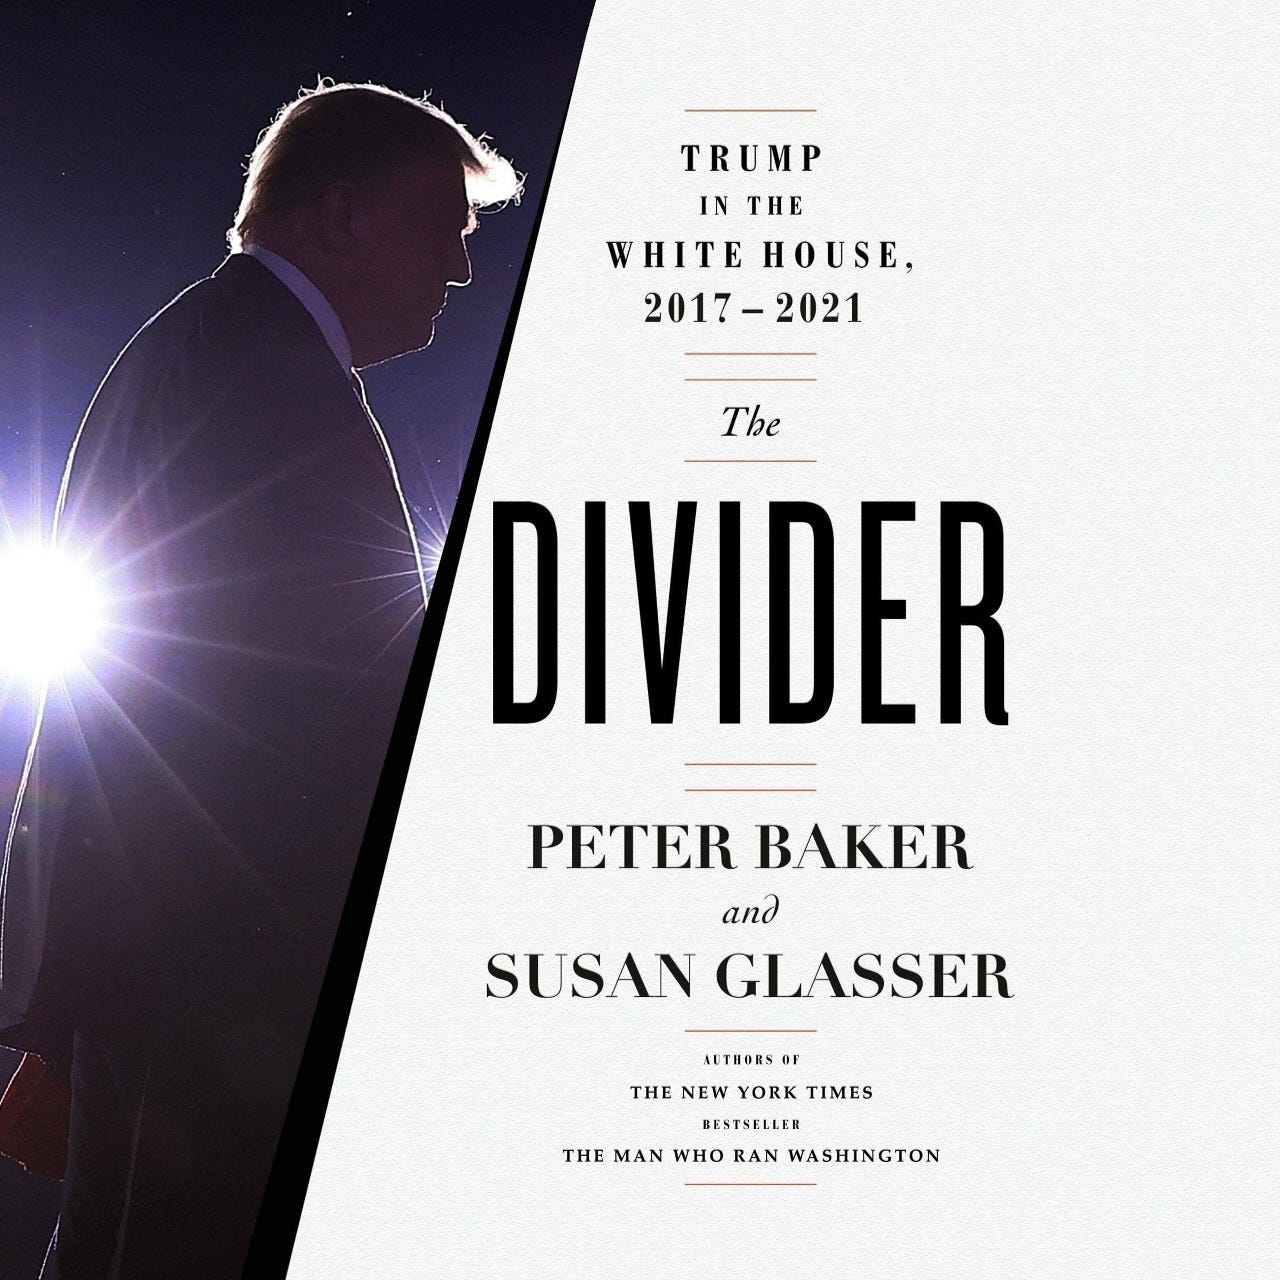 May be an image of 1 person and text that says 'TRUMP IN INTHE WHITE HOUSE, 2017-2021 The DIVIDER PETER BAKER and SUSAN GLASSER AUTHORS THE NEW YORK TIMES BESTSELL THE MAN WHO RAN WASHINGTON'